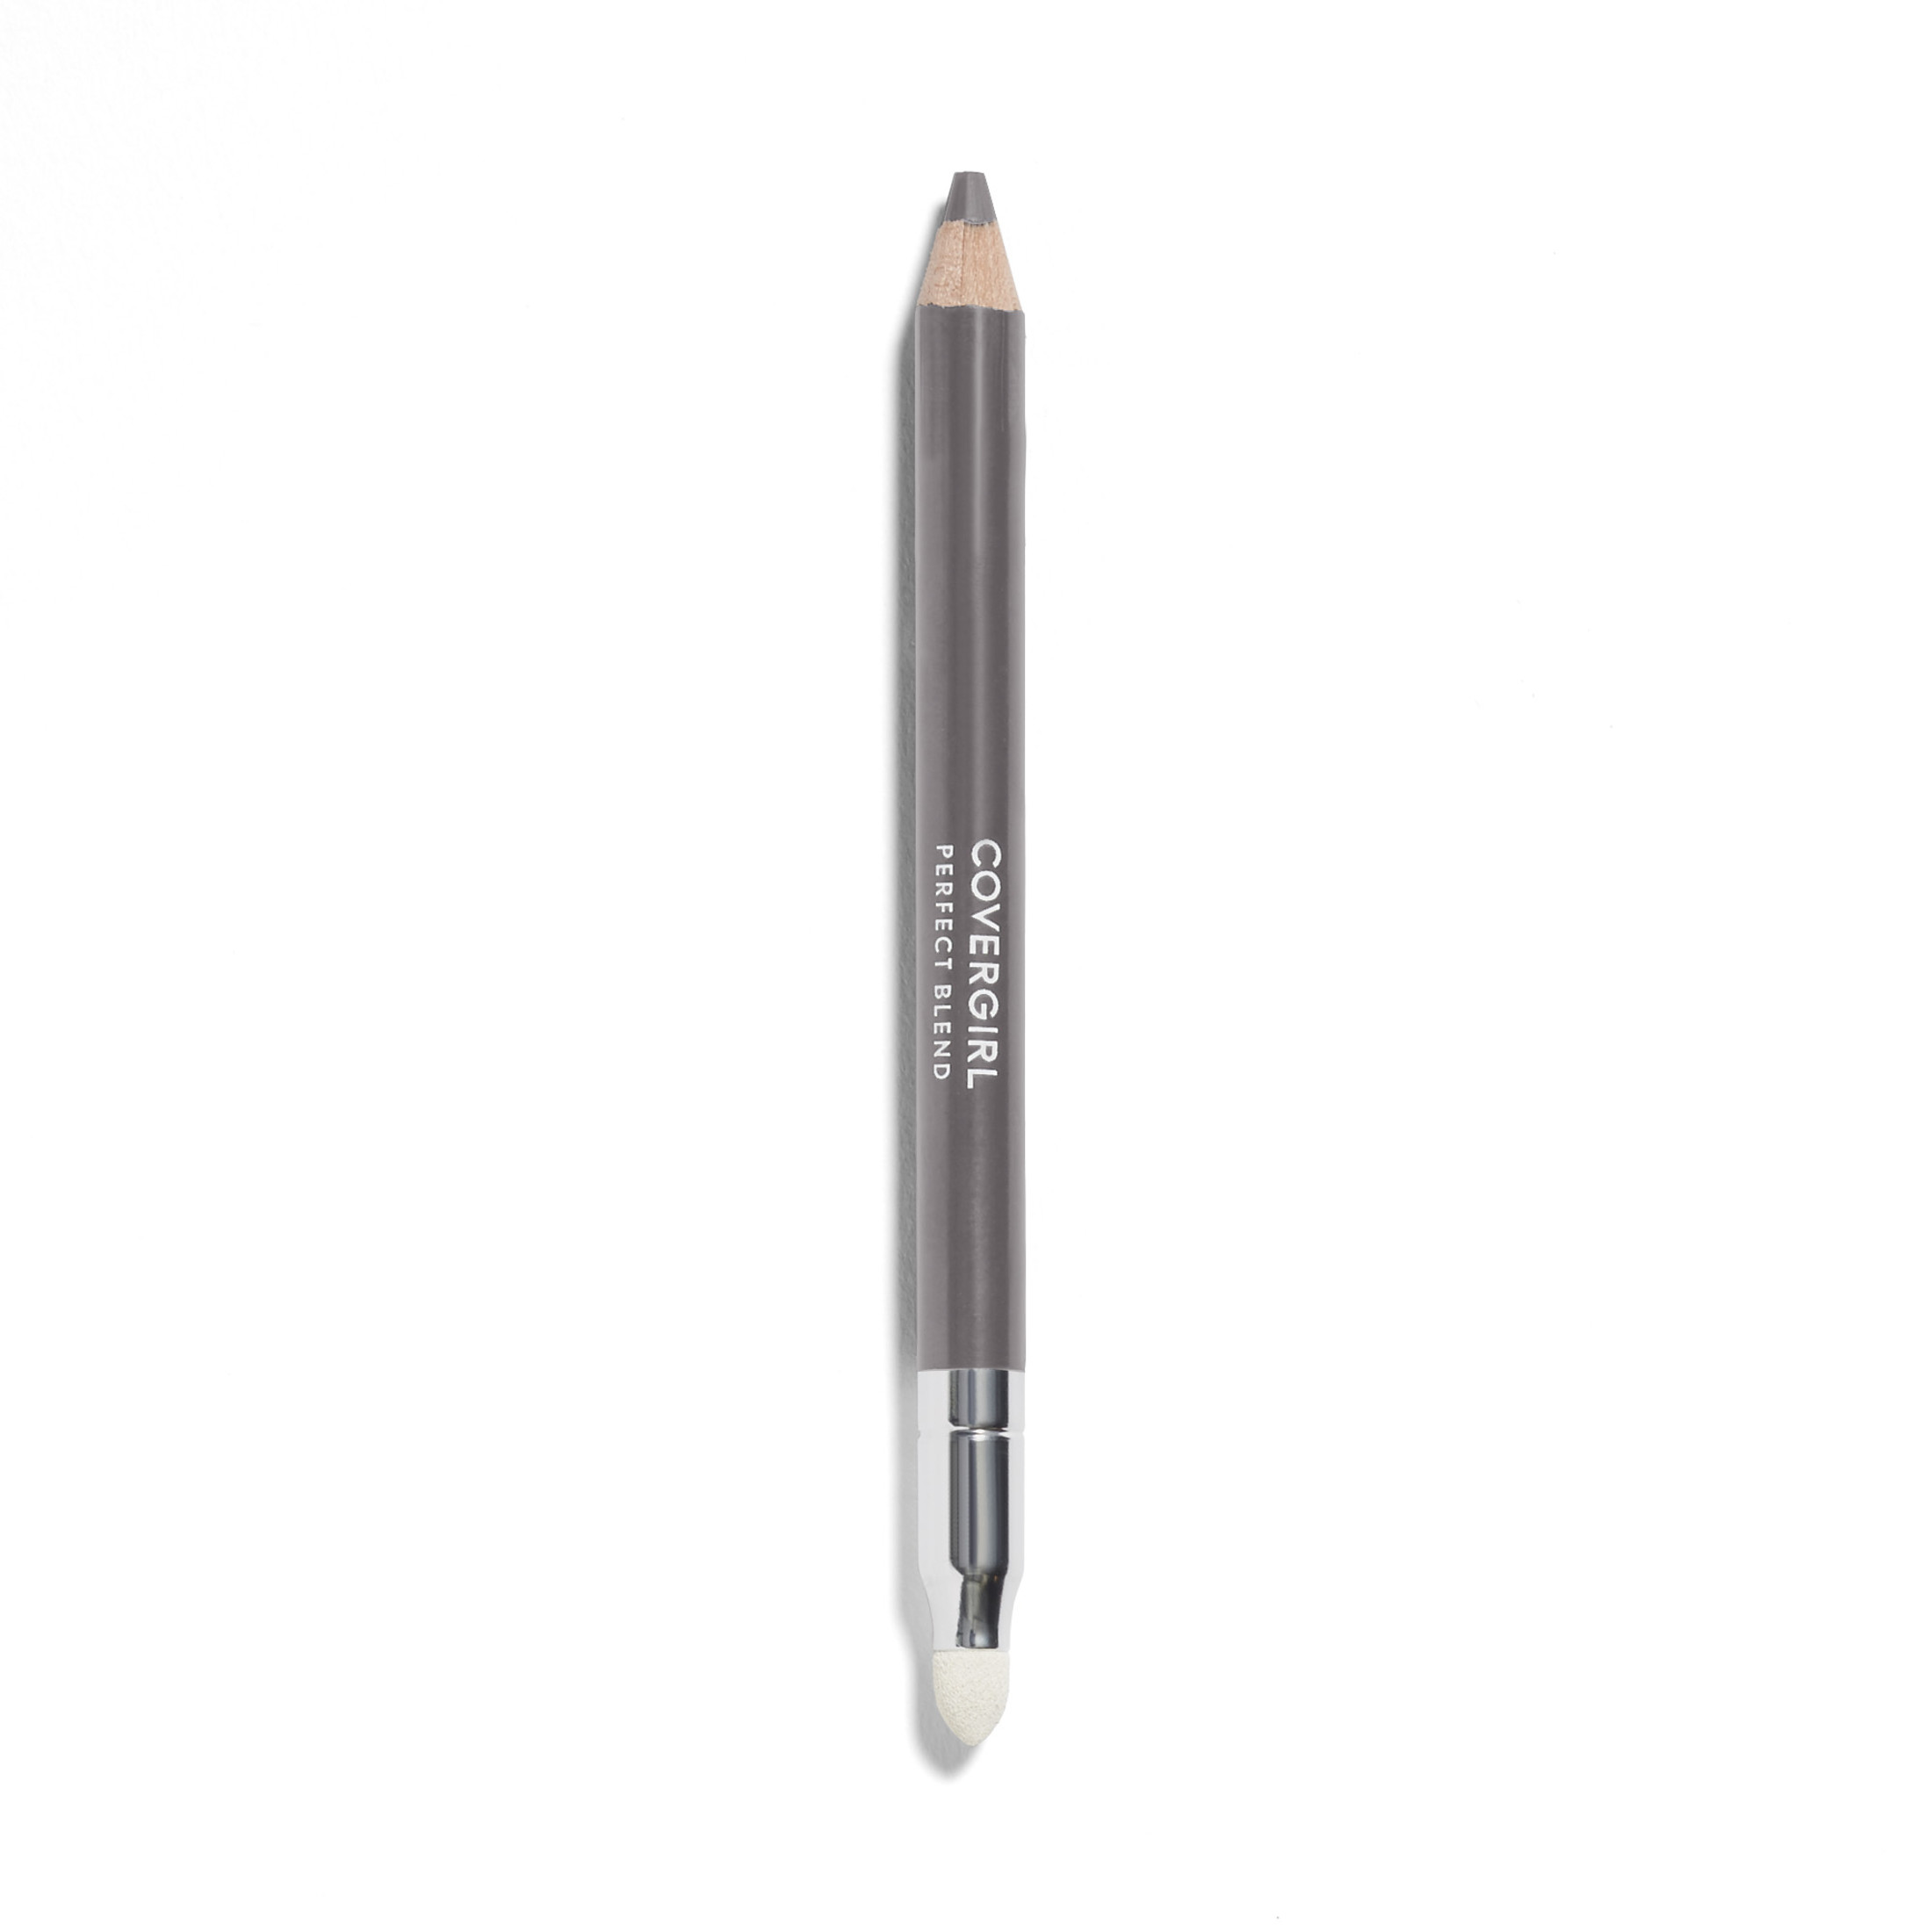 COVERGIRL Perfect Blend Eyeliner Pencil, 105 Charcoal Neutral, 0.03 oz - image 1 of 7